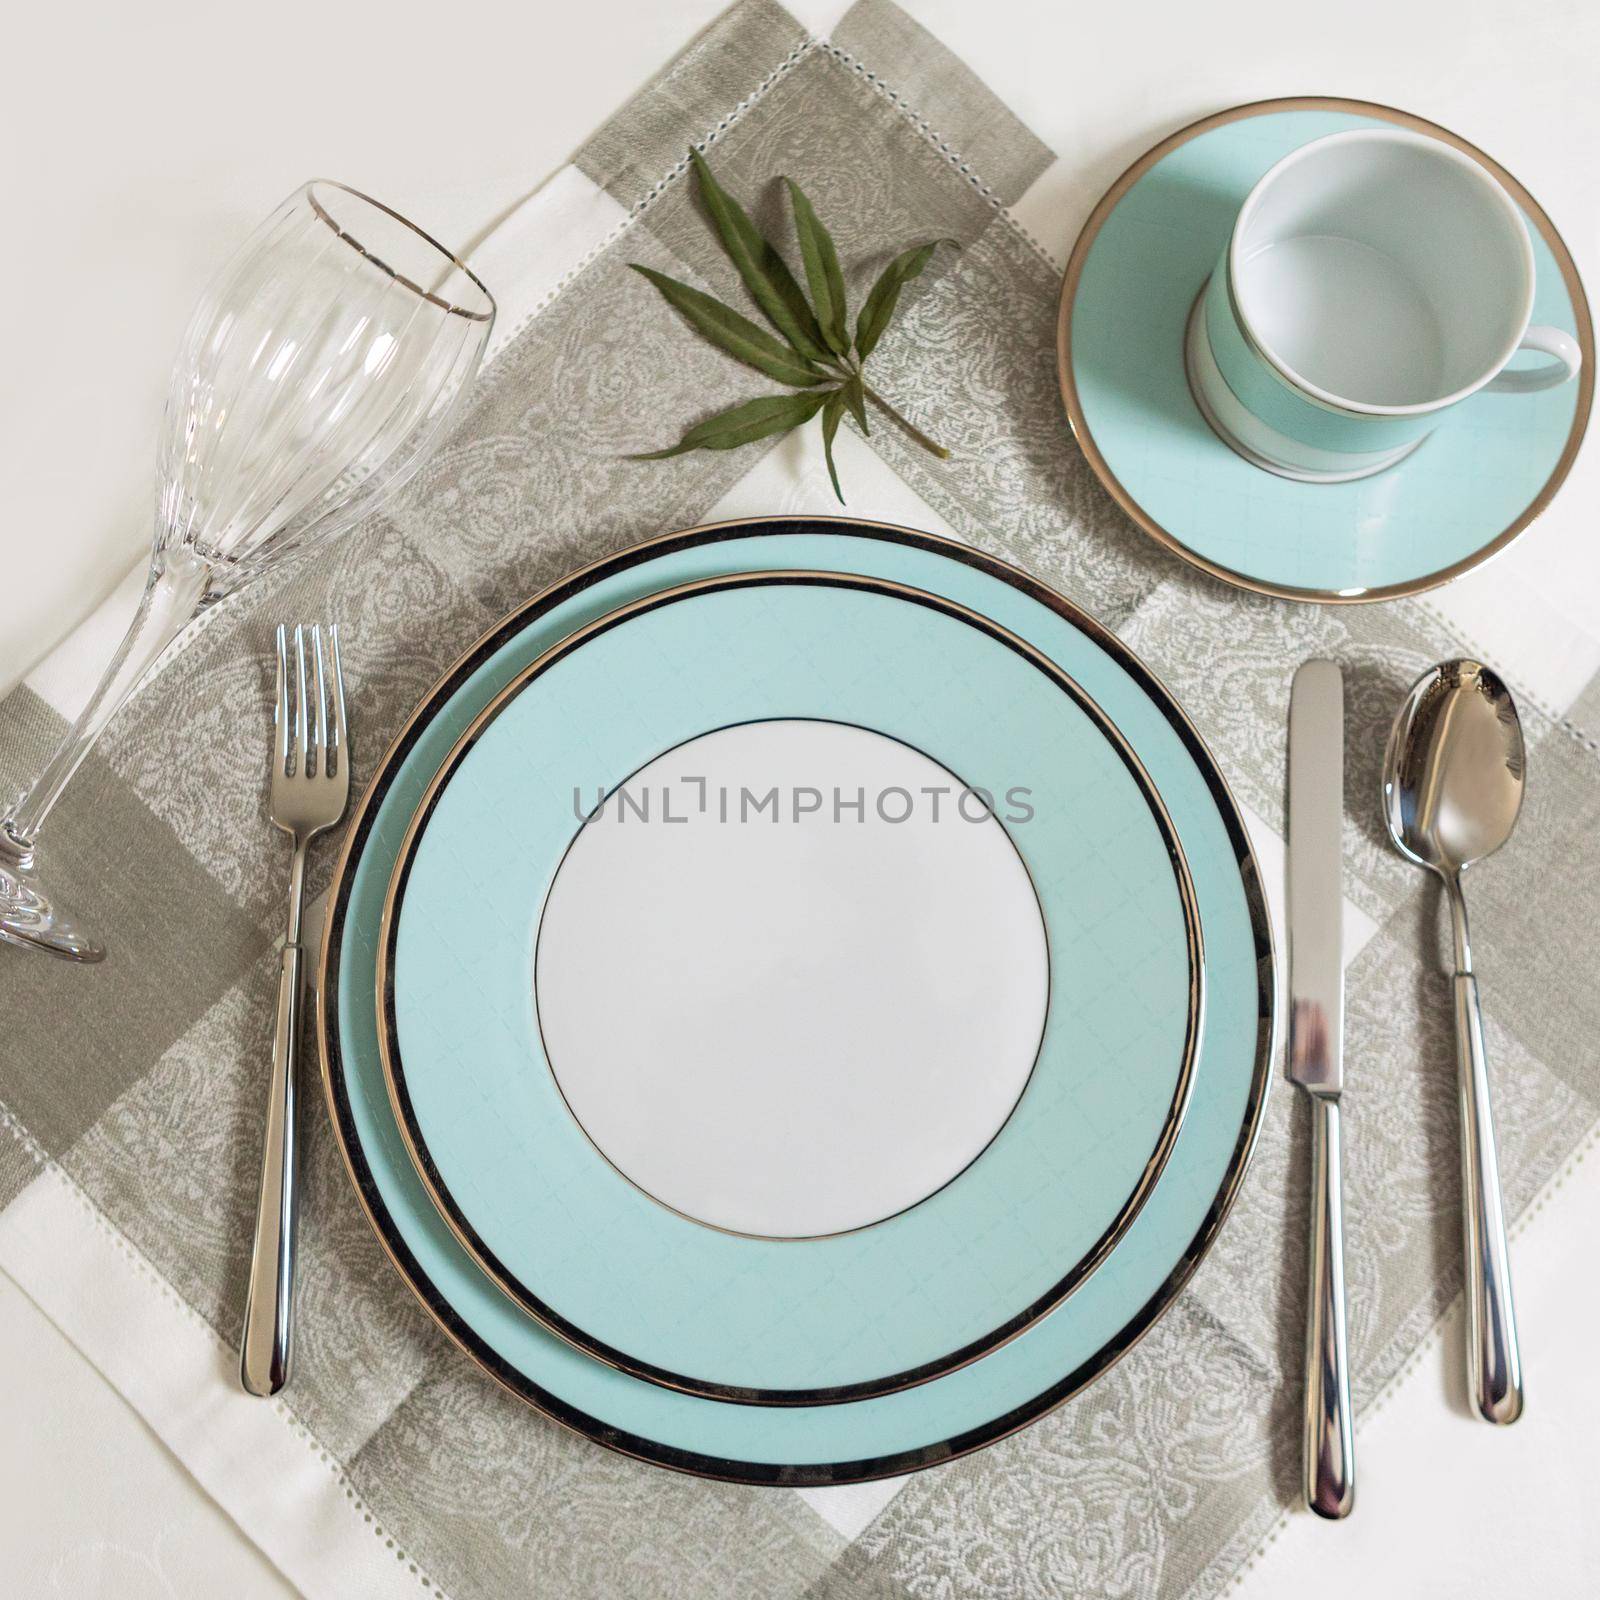 Set of clean tableware, dishes, plates, utensils on the table by ferhad